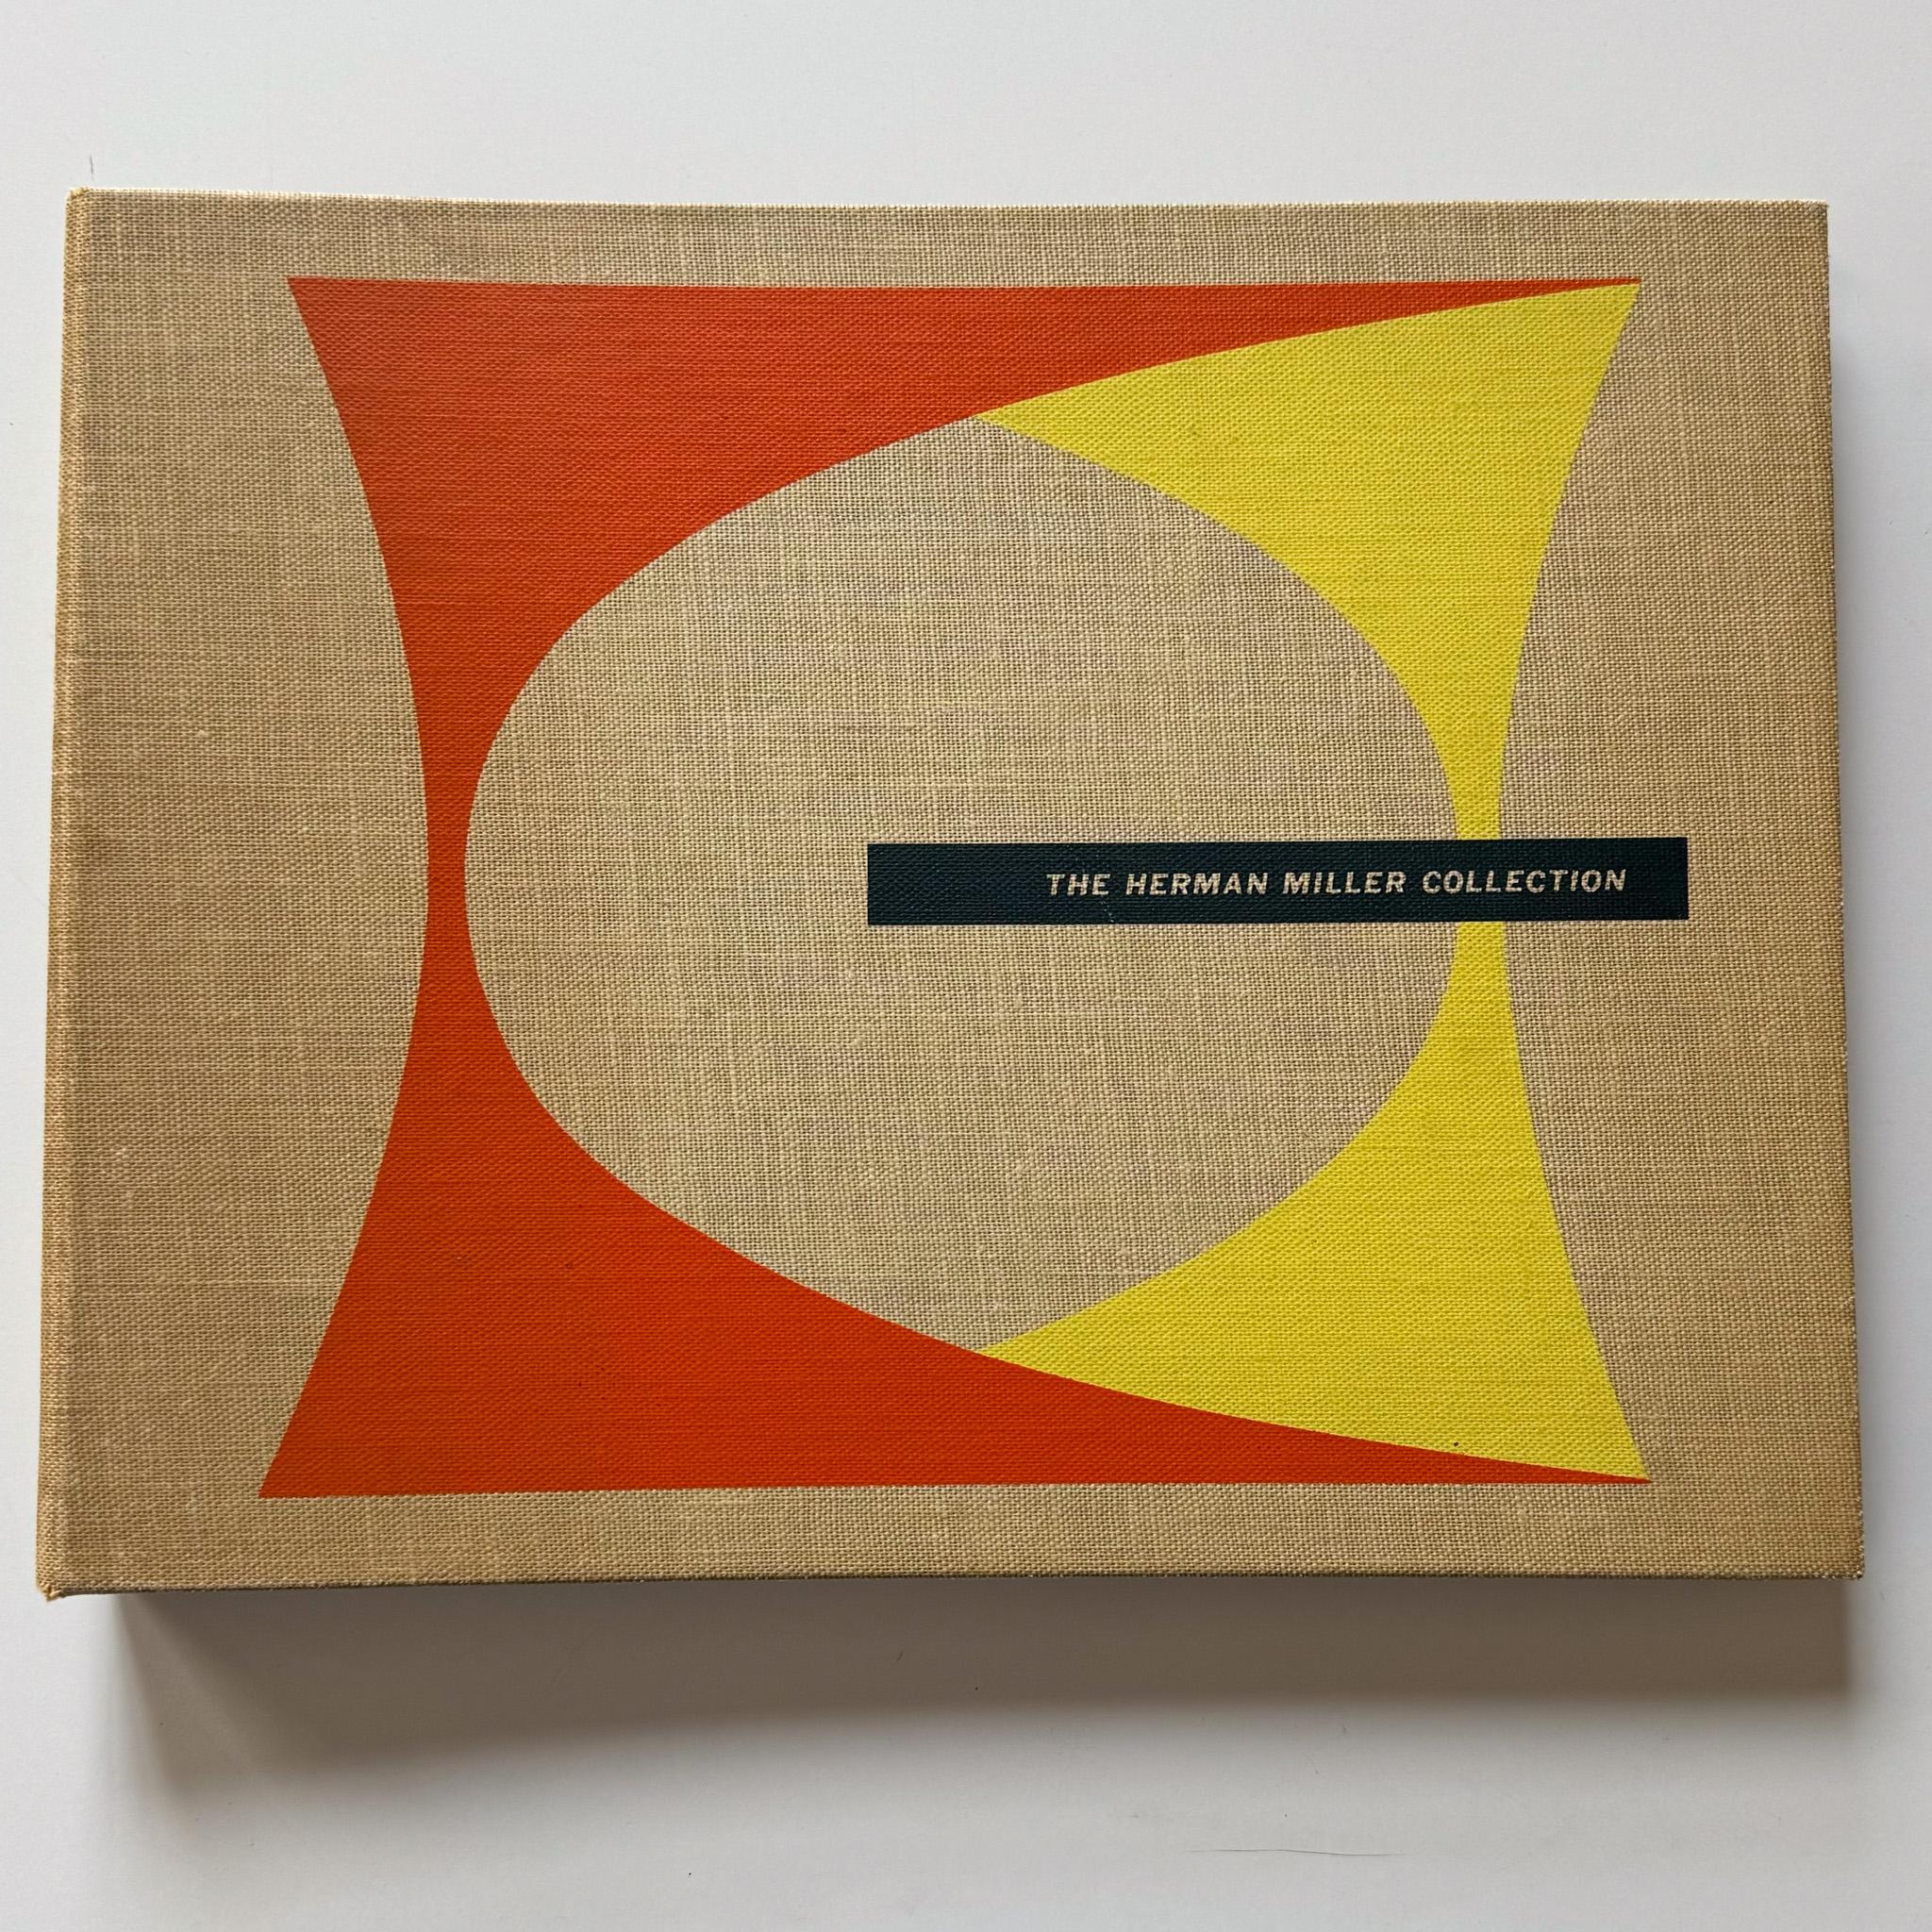 First edition ring-binder catalog of the Herman Miller Collection, showcasing the designs of Charles (and Ray) Eames and George Nelson (and Associates). Published in 1955 by Herman Miller, Inc, with an introduction by George Nelson. Oblong 4to (9.5”